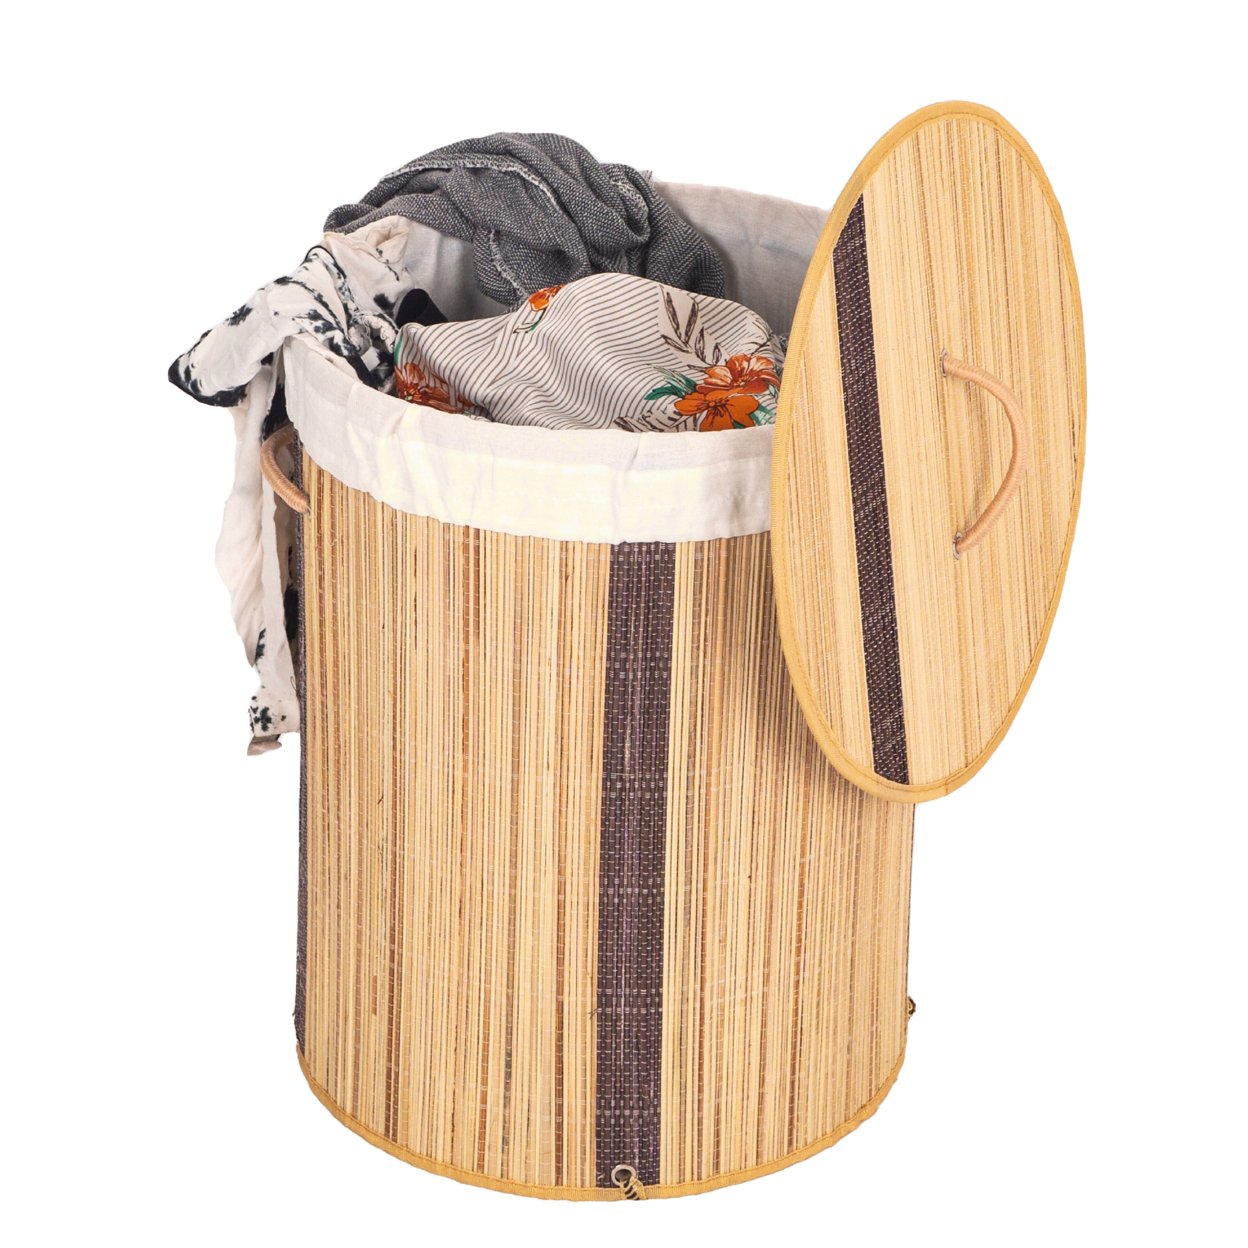 Foldable Laundry Hamper With Lid And Handles For Easy Carrying - Coconut Stick Round